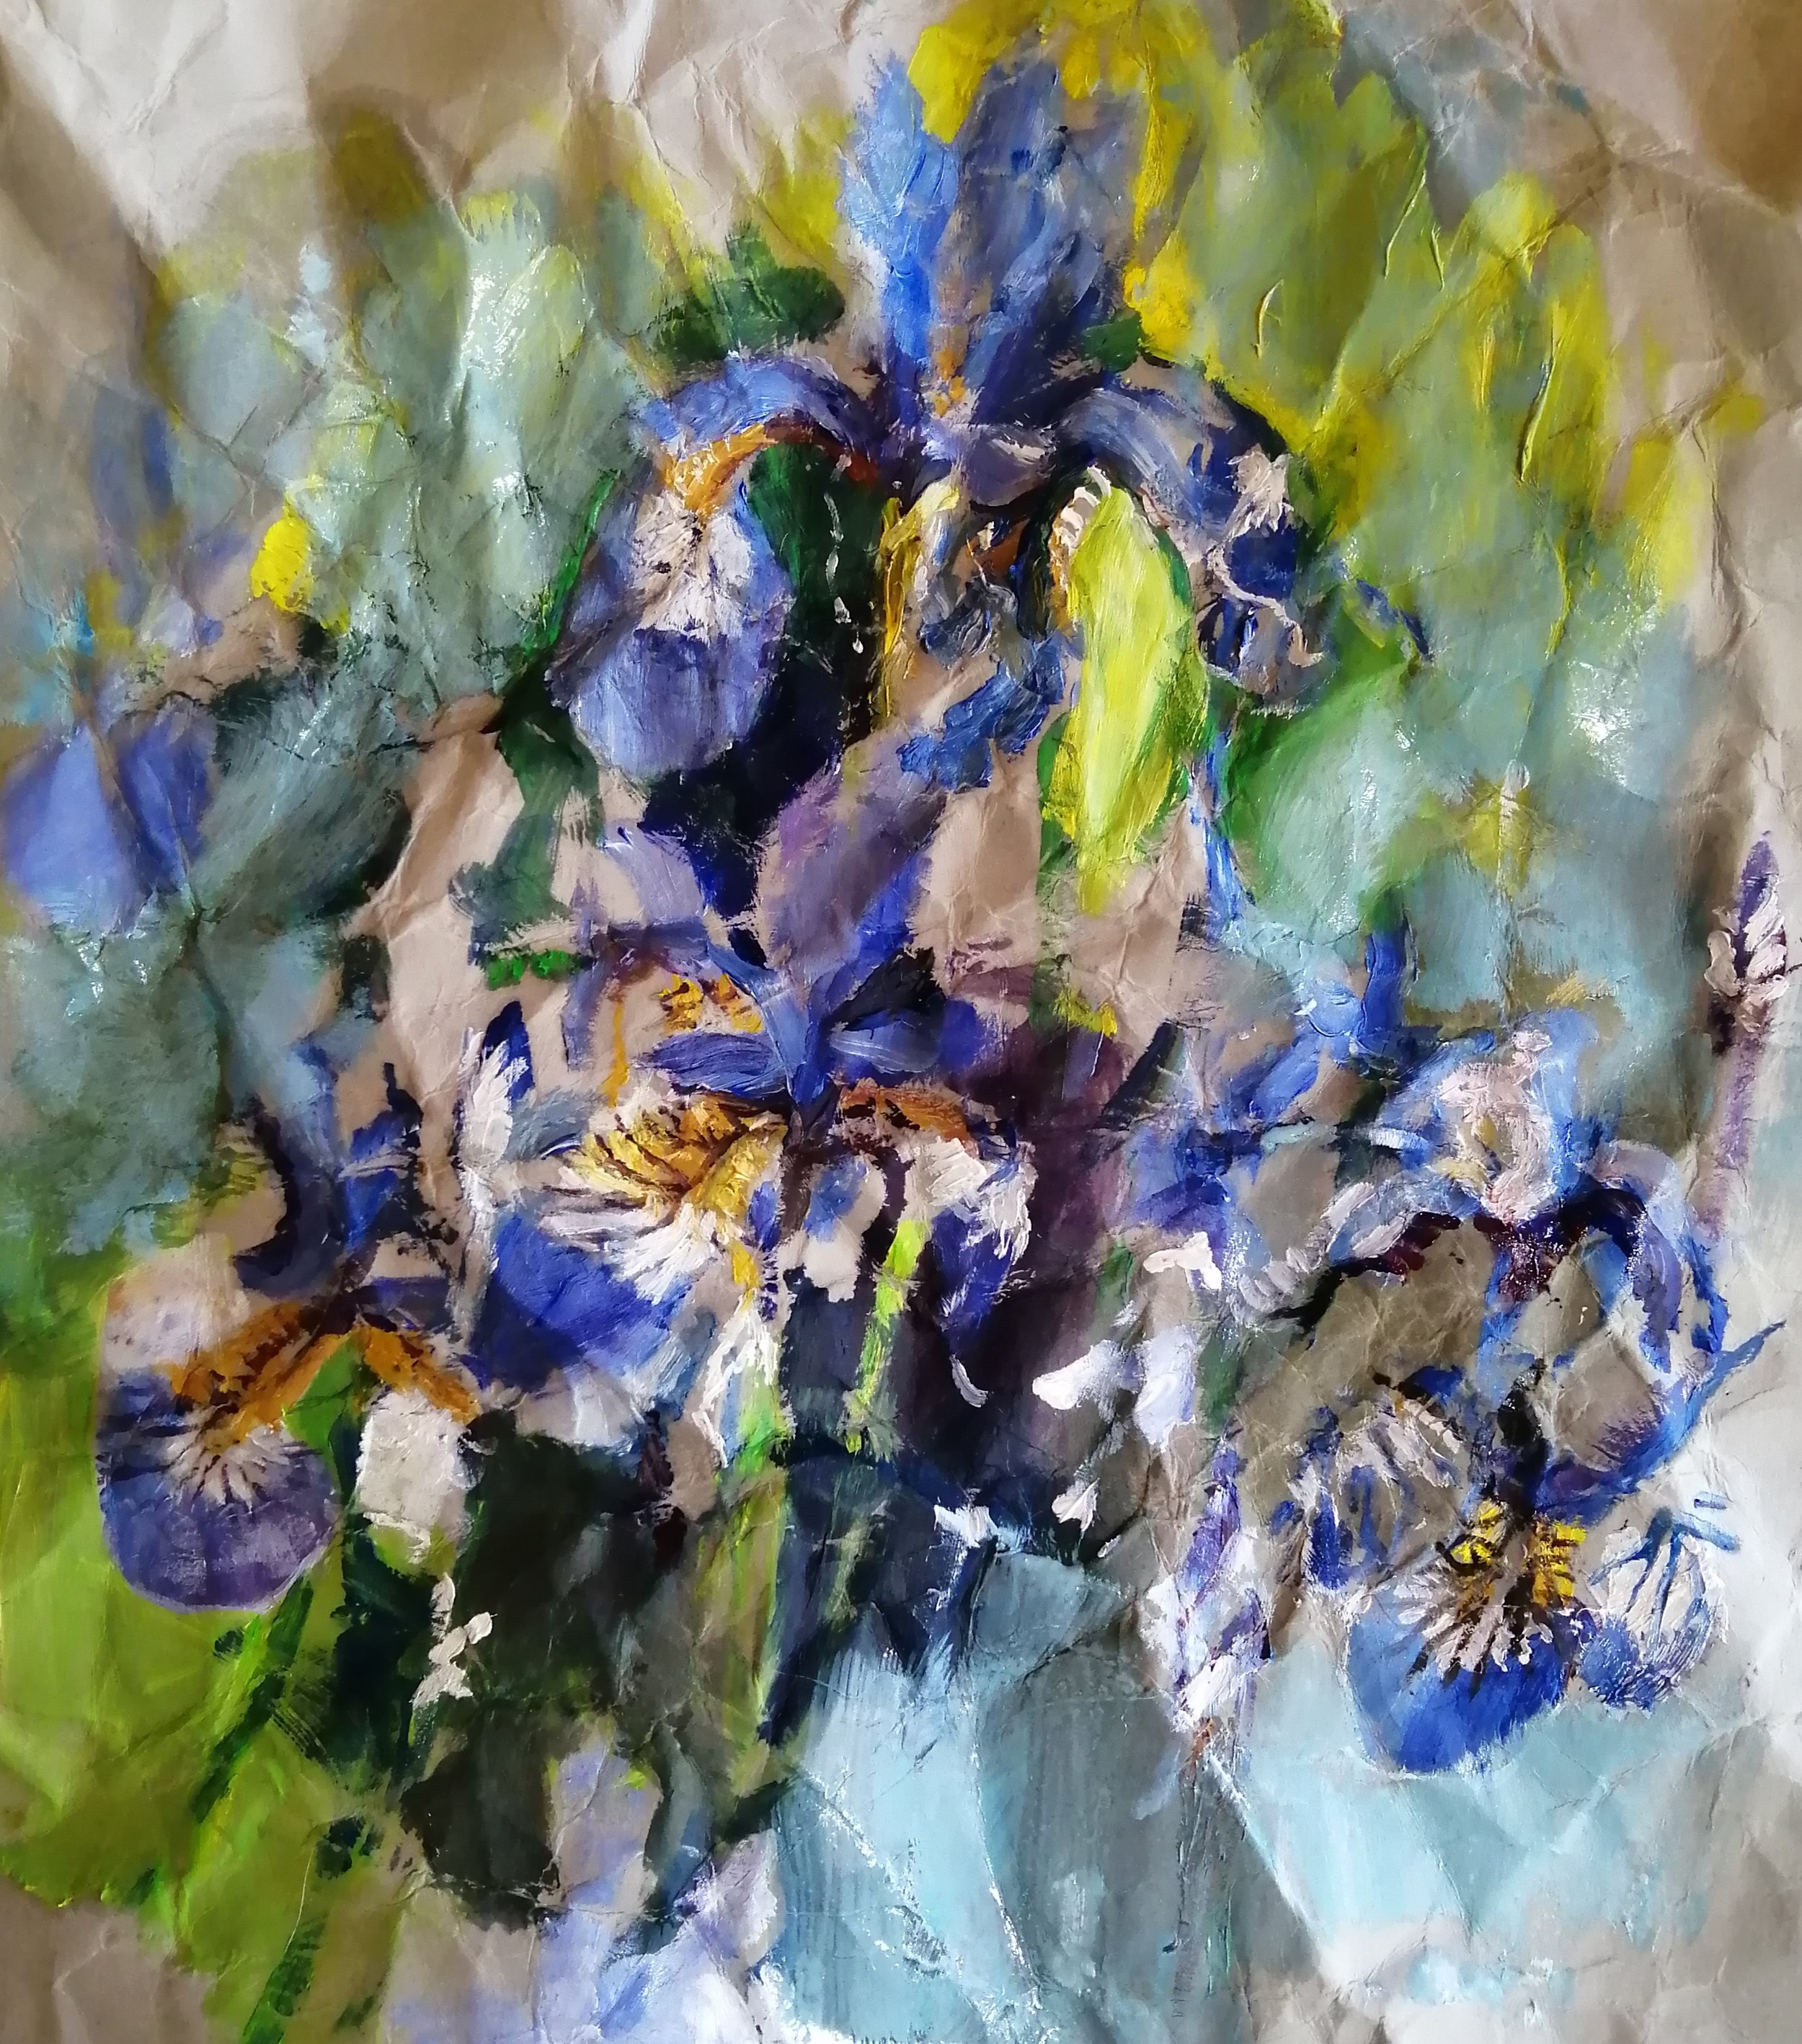  Irises, day 3  Oil on crumpled paper 